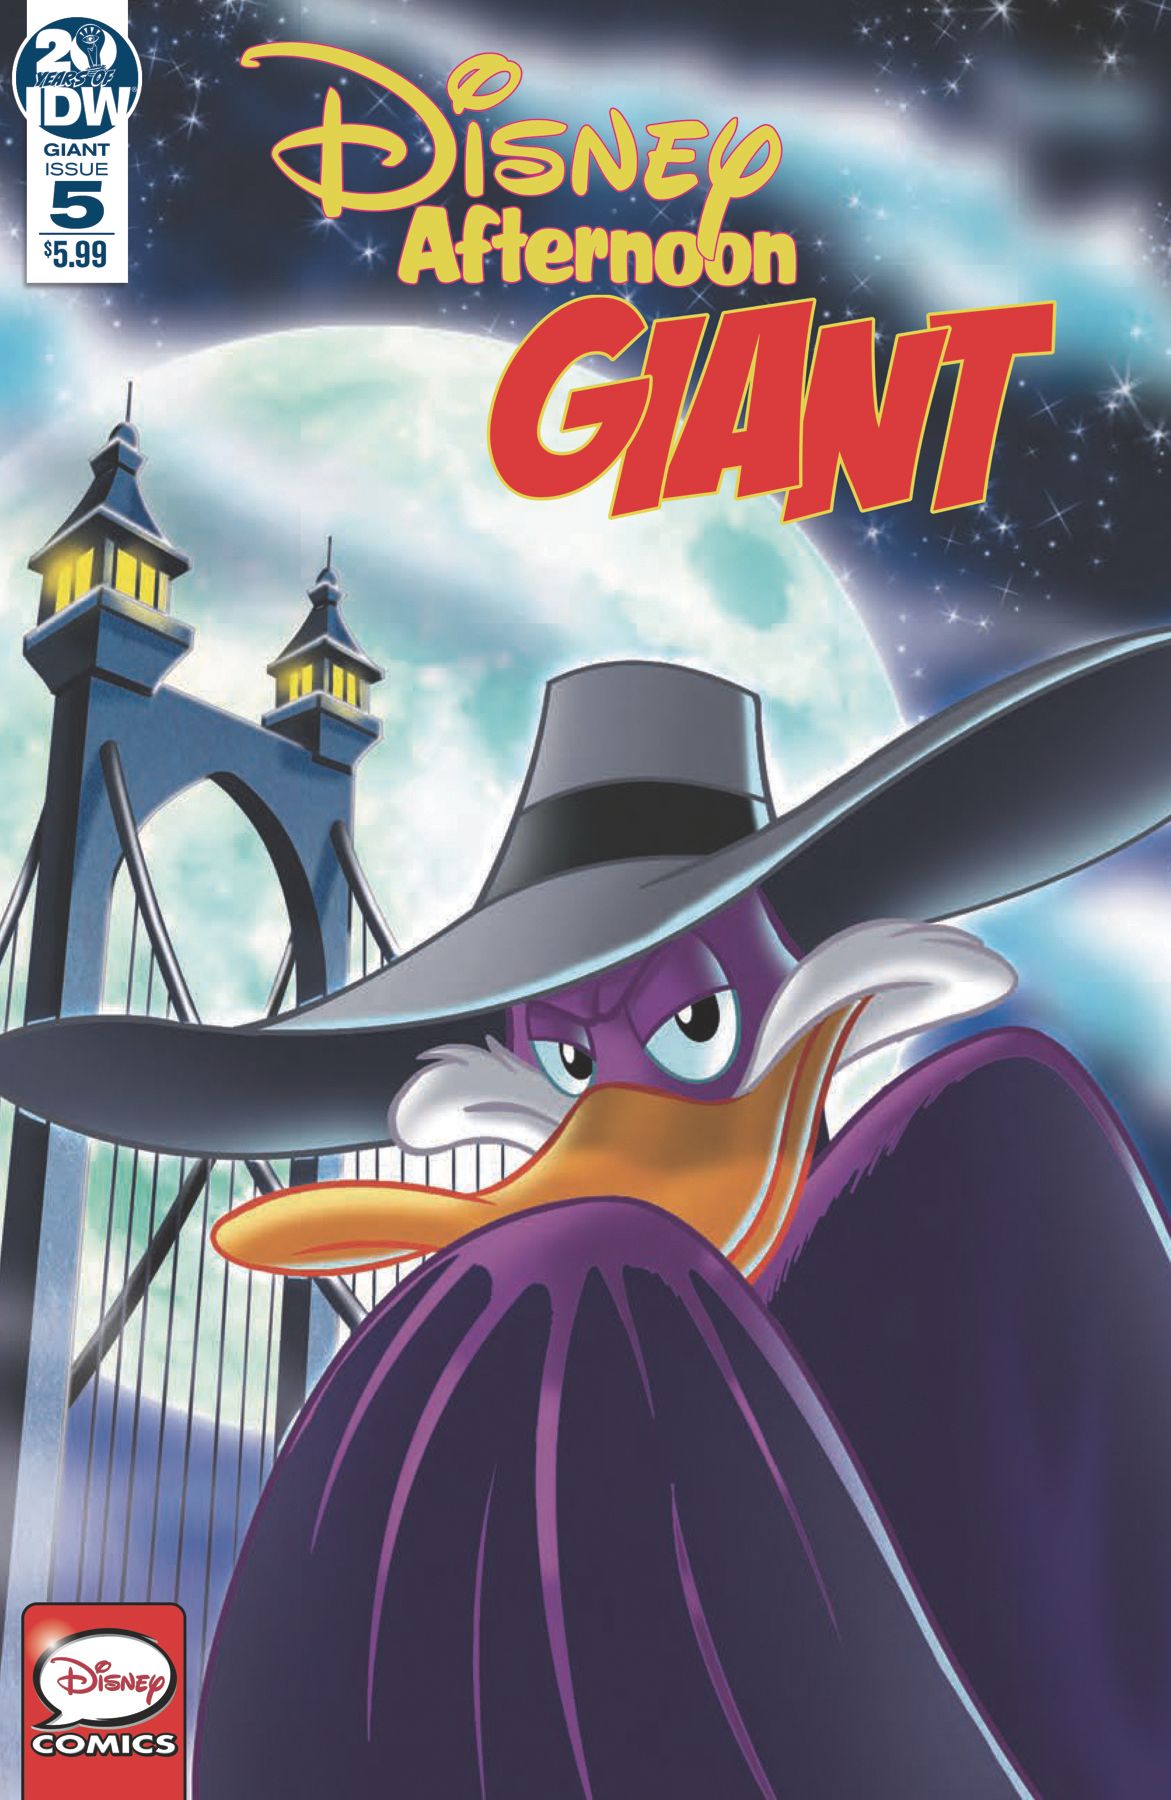 Disney Afternoon Giant #5 Comic